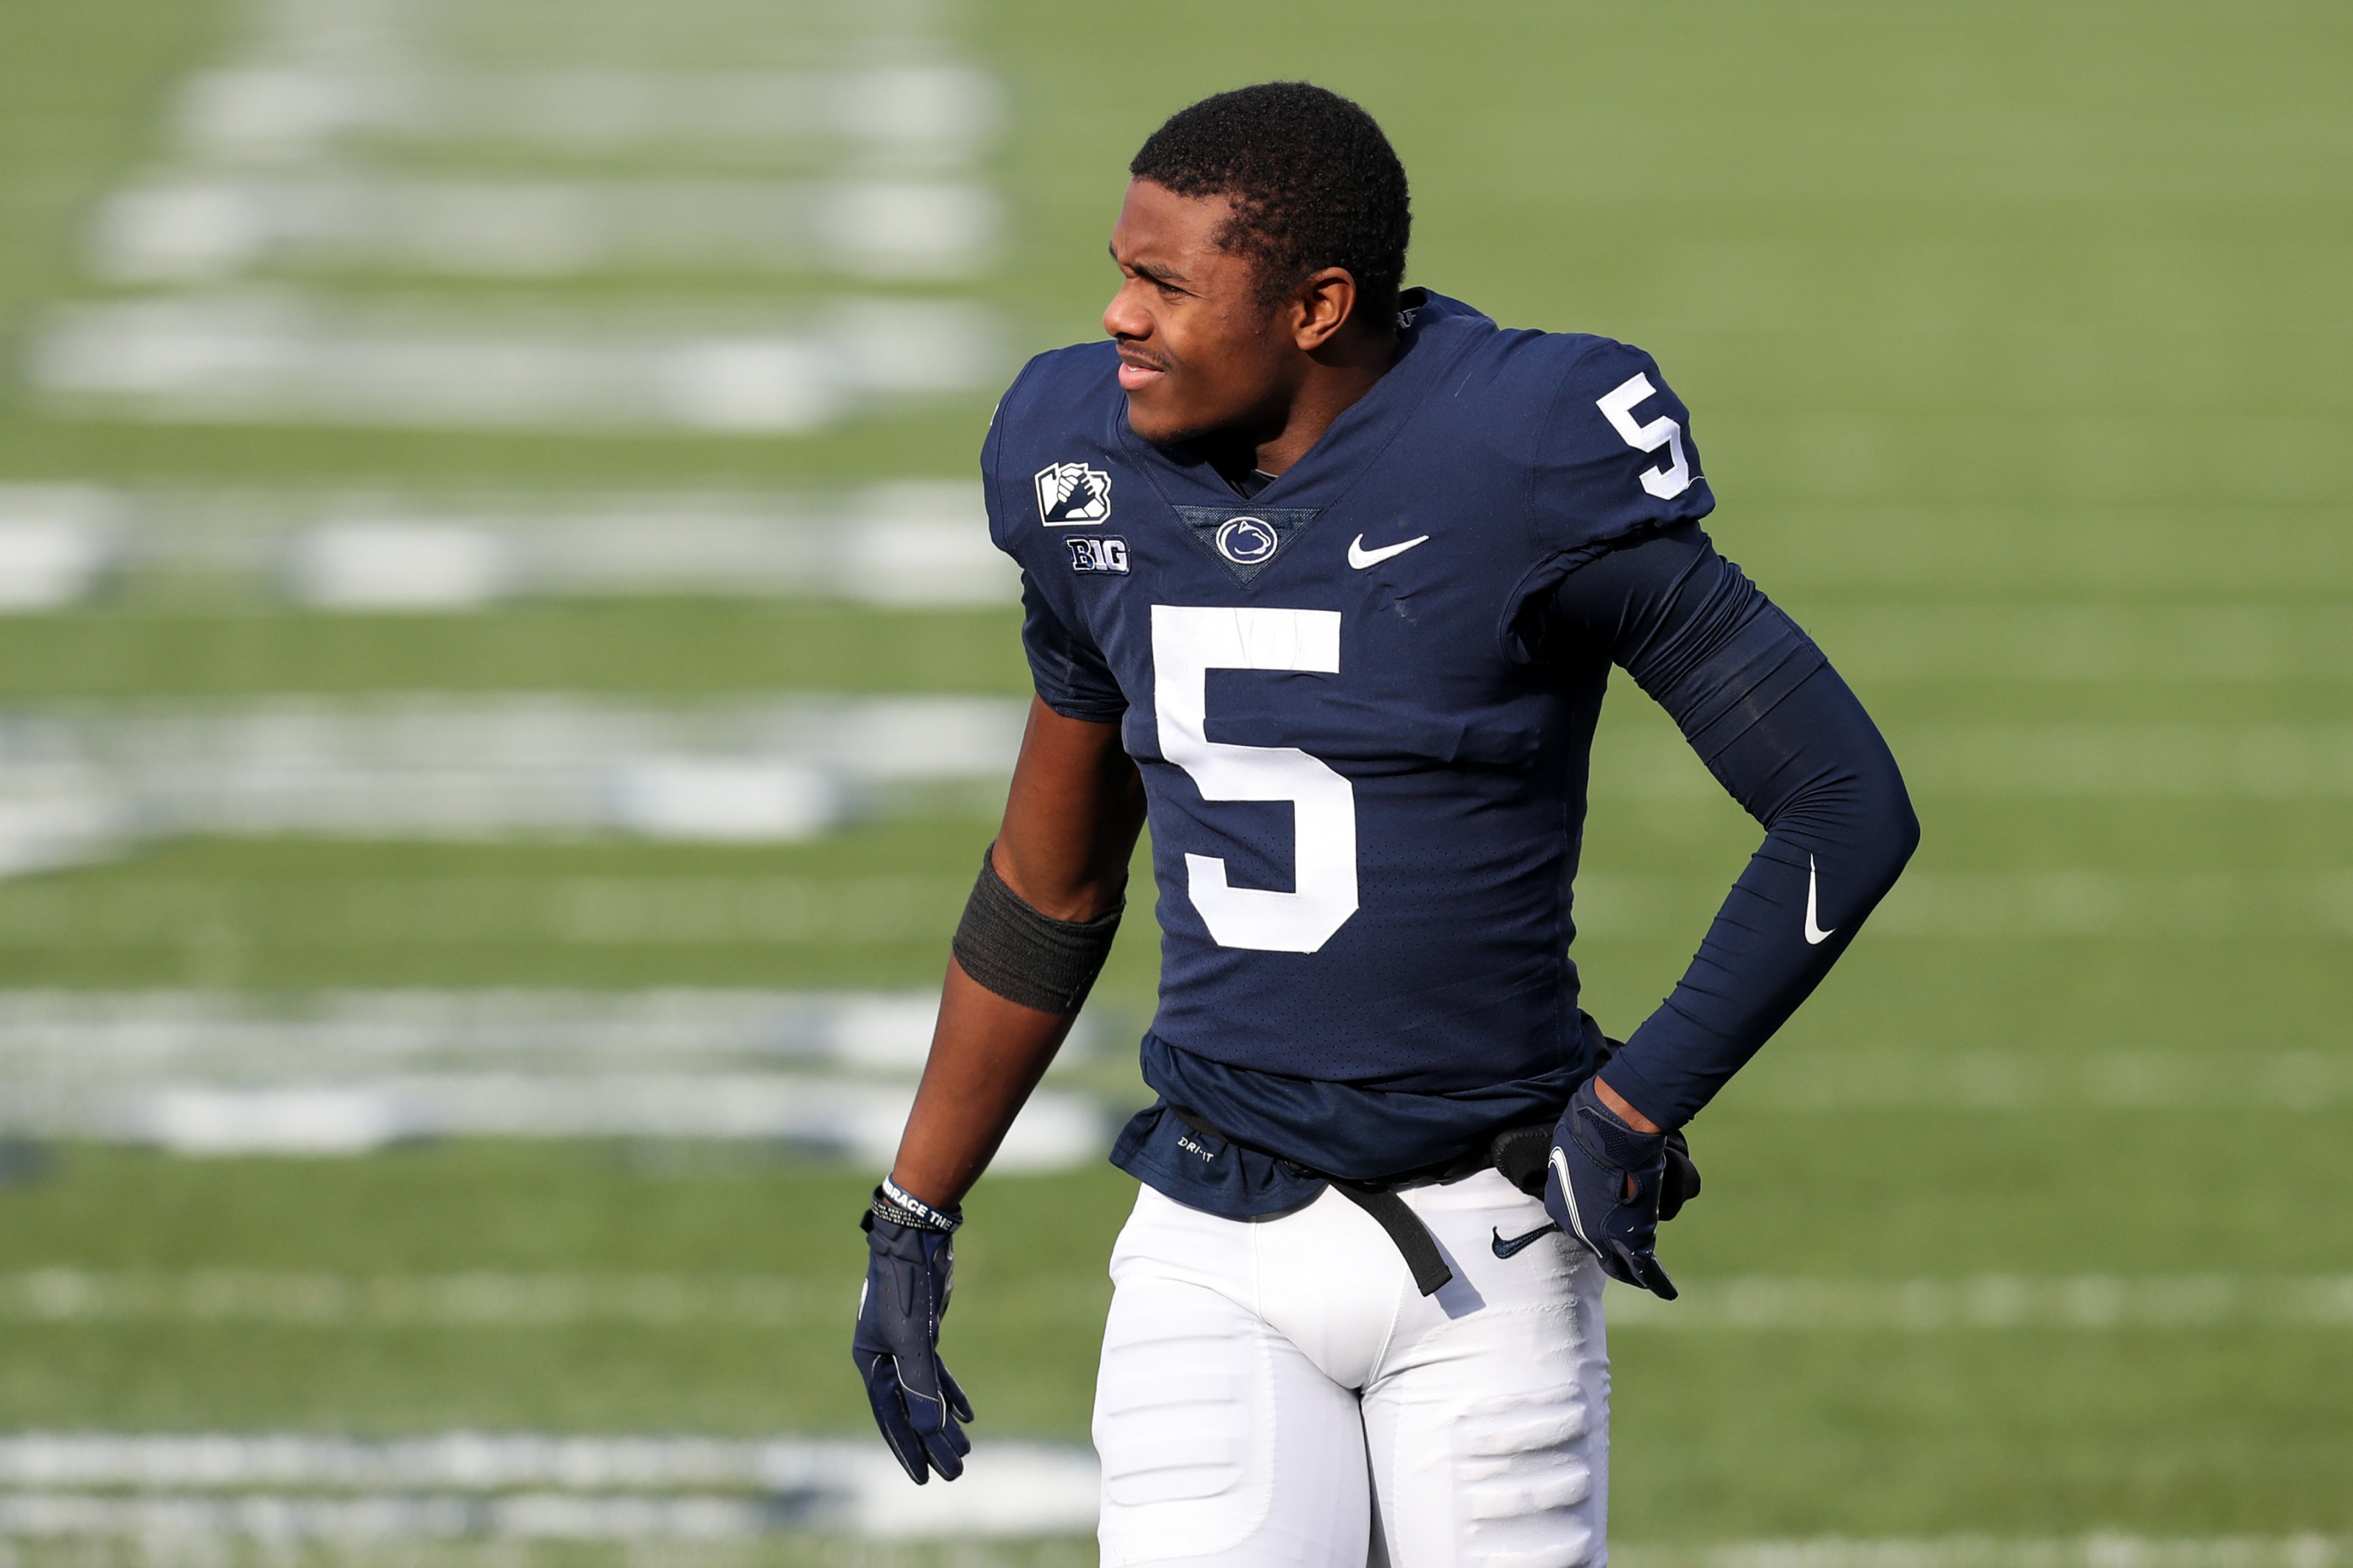 Best NFL Combine photos of Penn State wide receiver Jahan Dotson